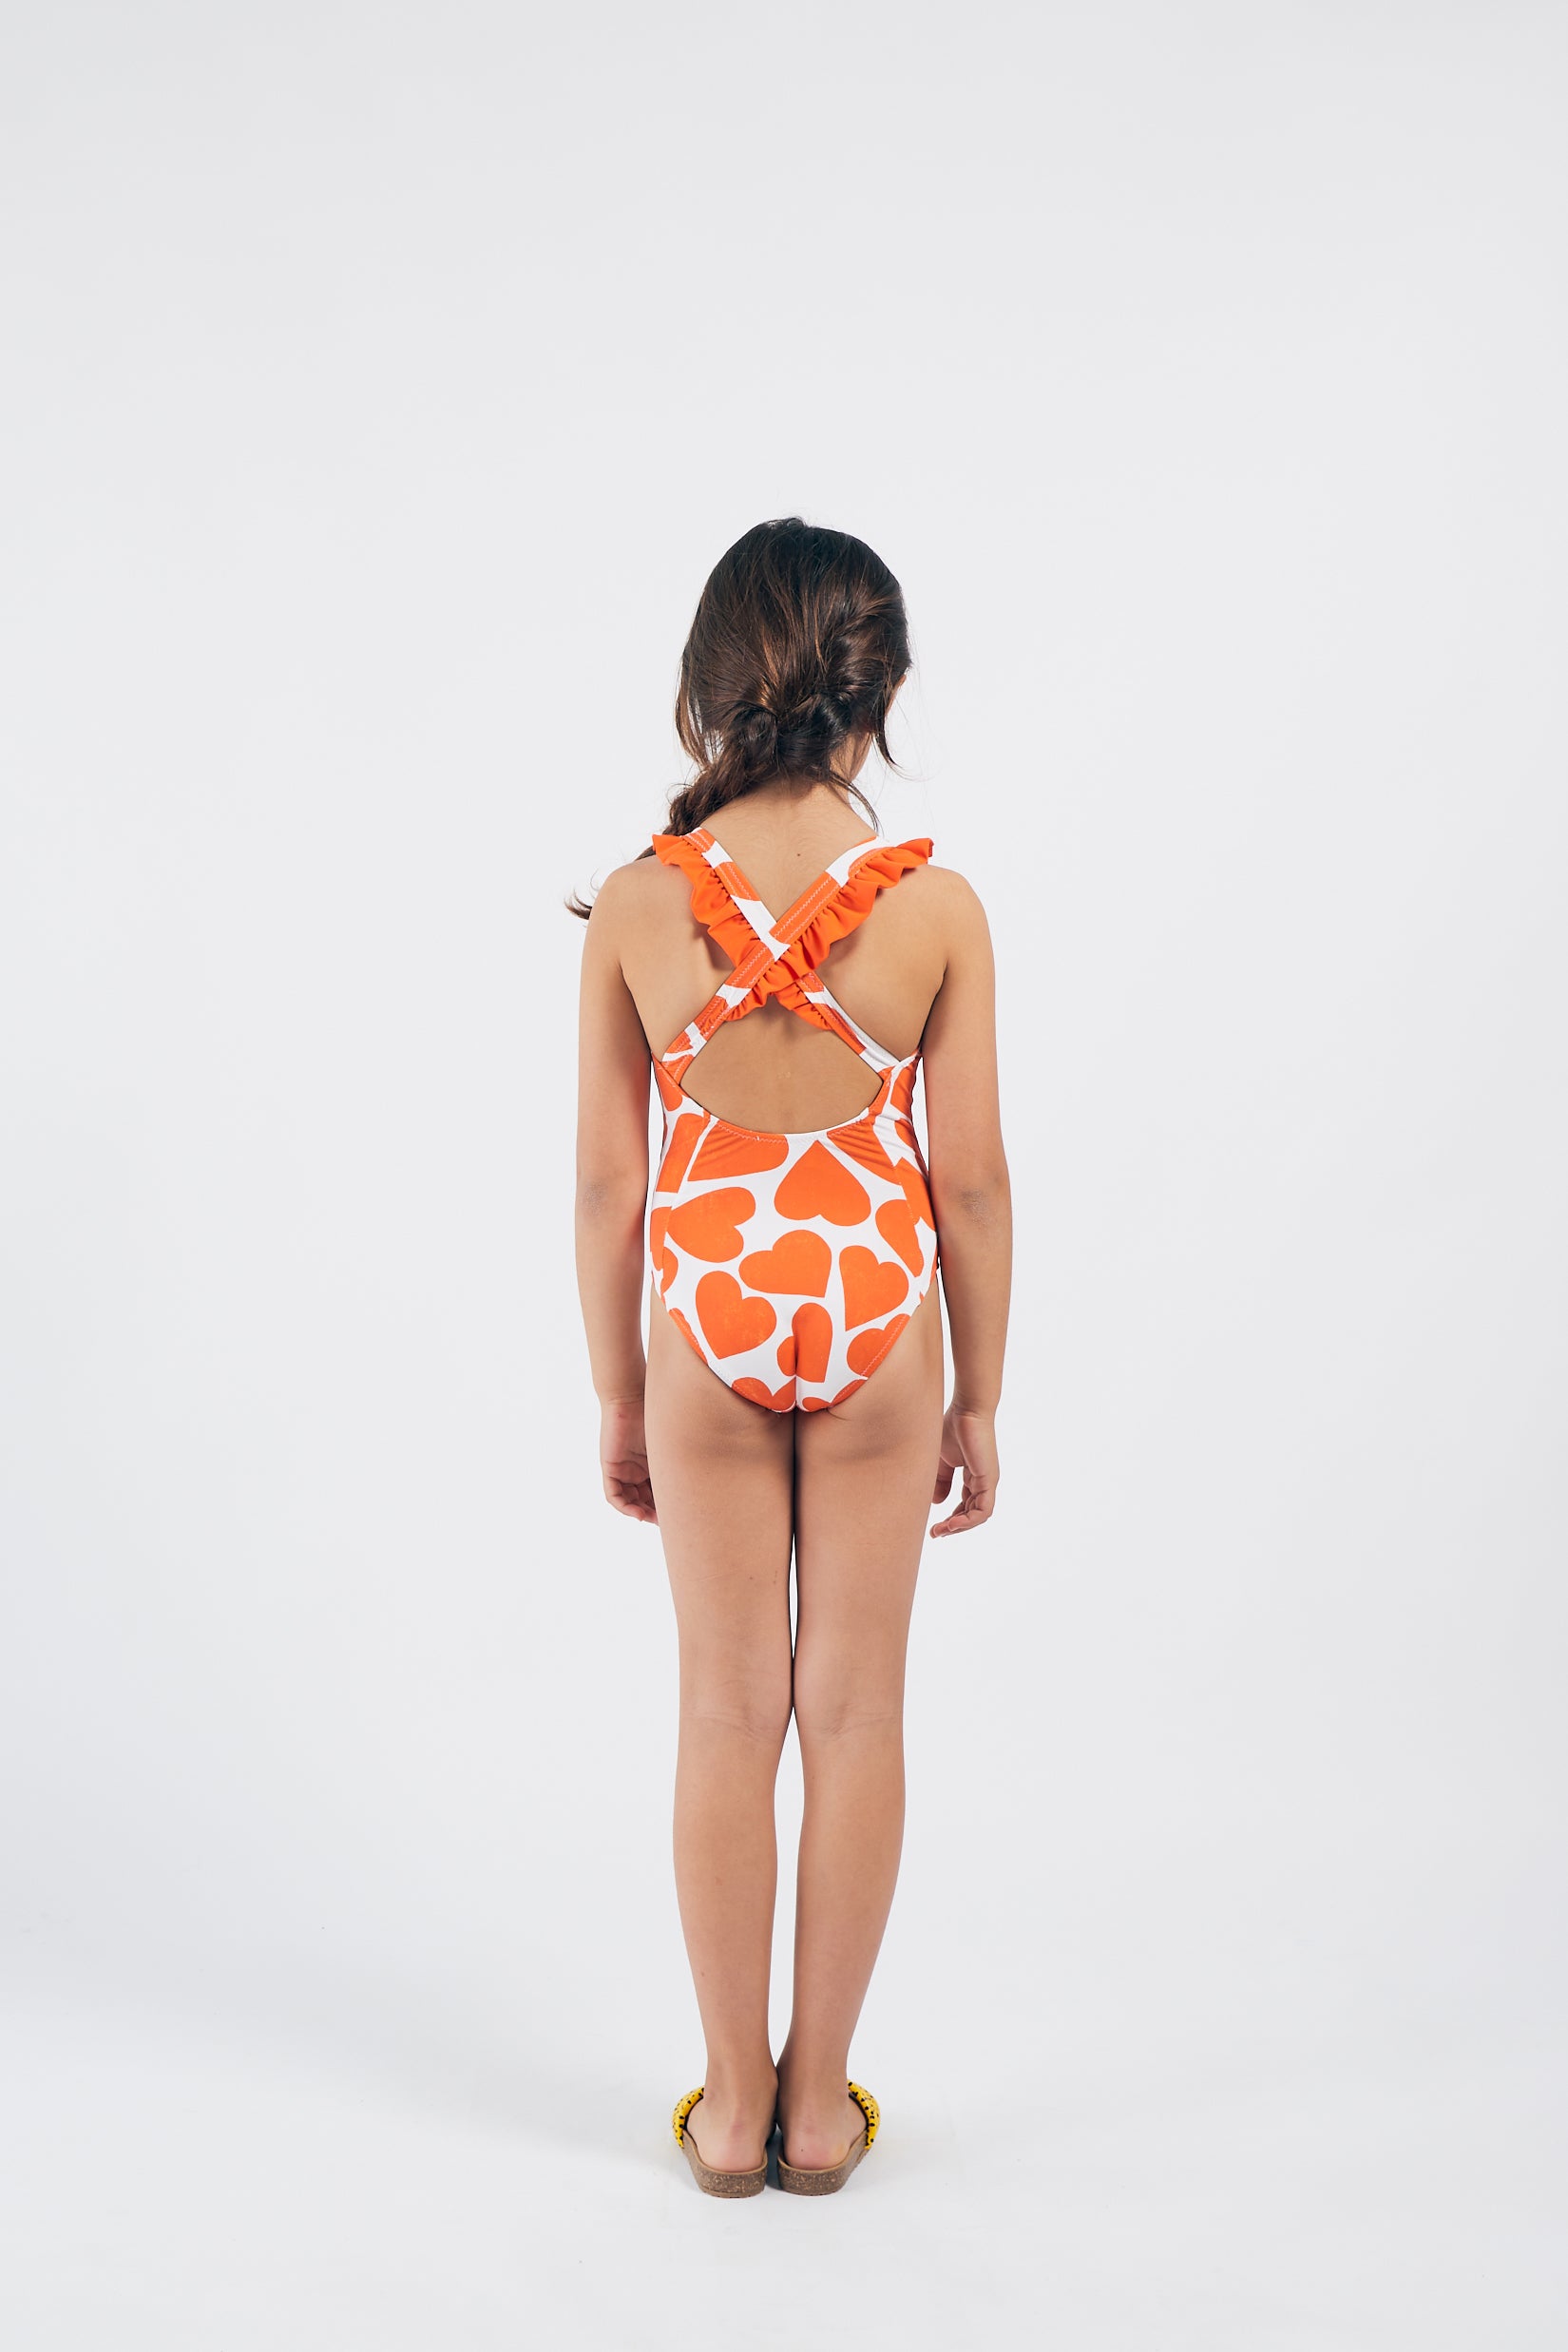 Bobo Choses All Over Hearts Swimsuit